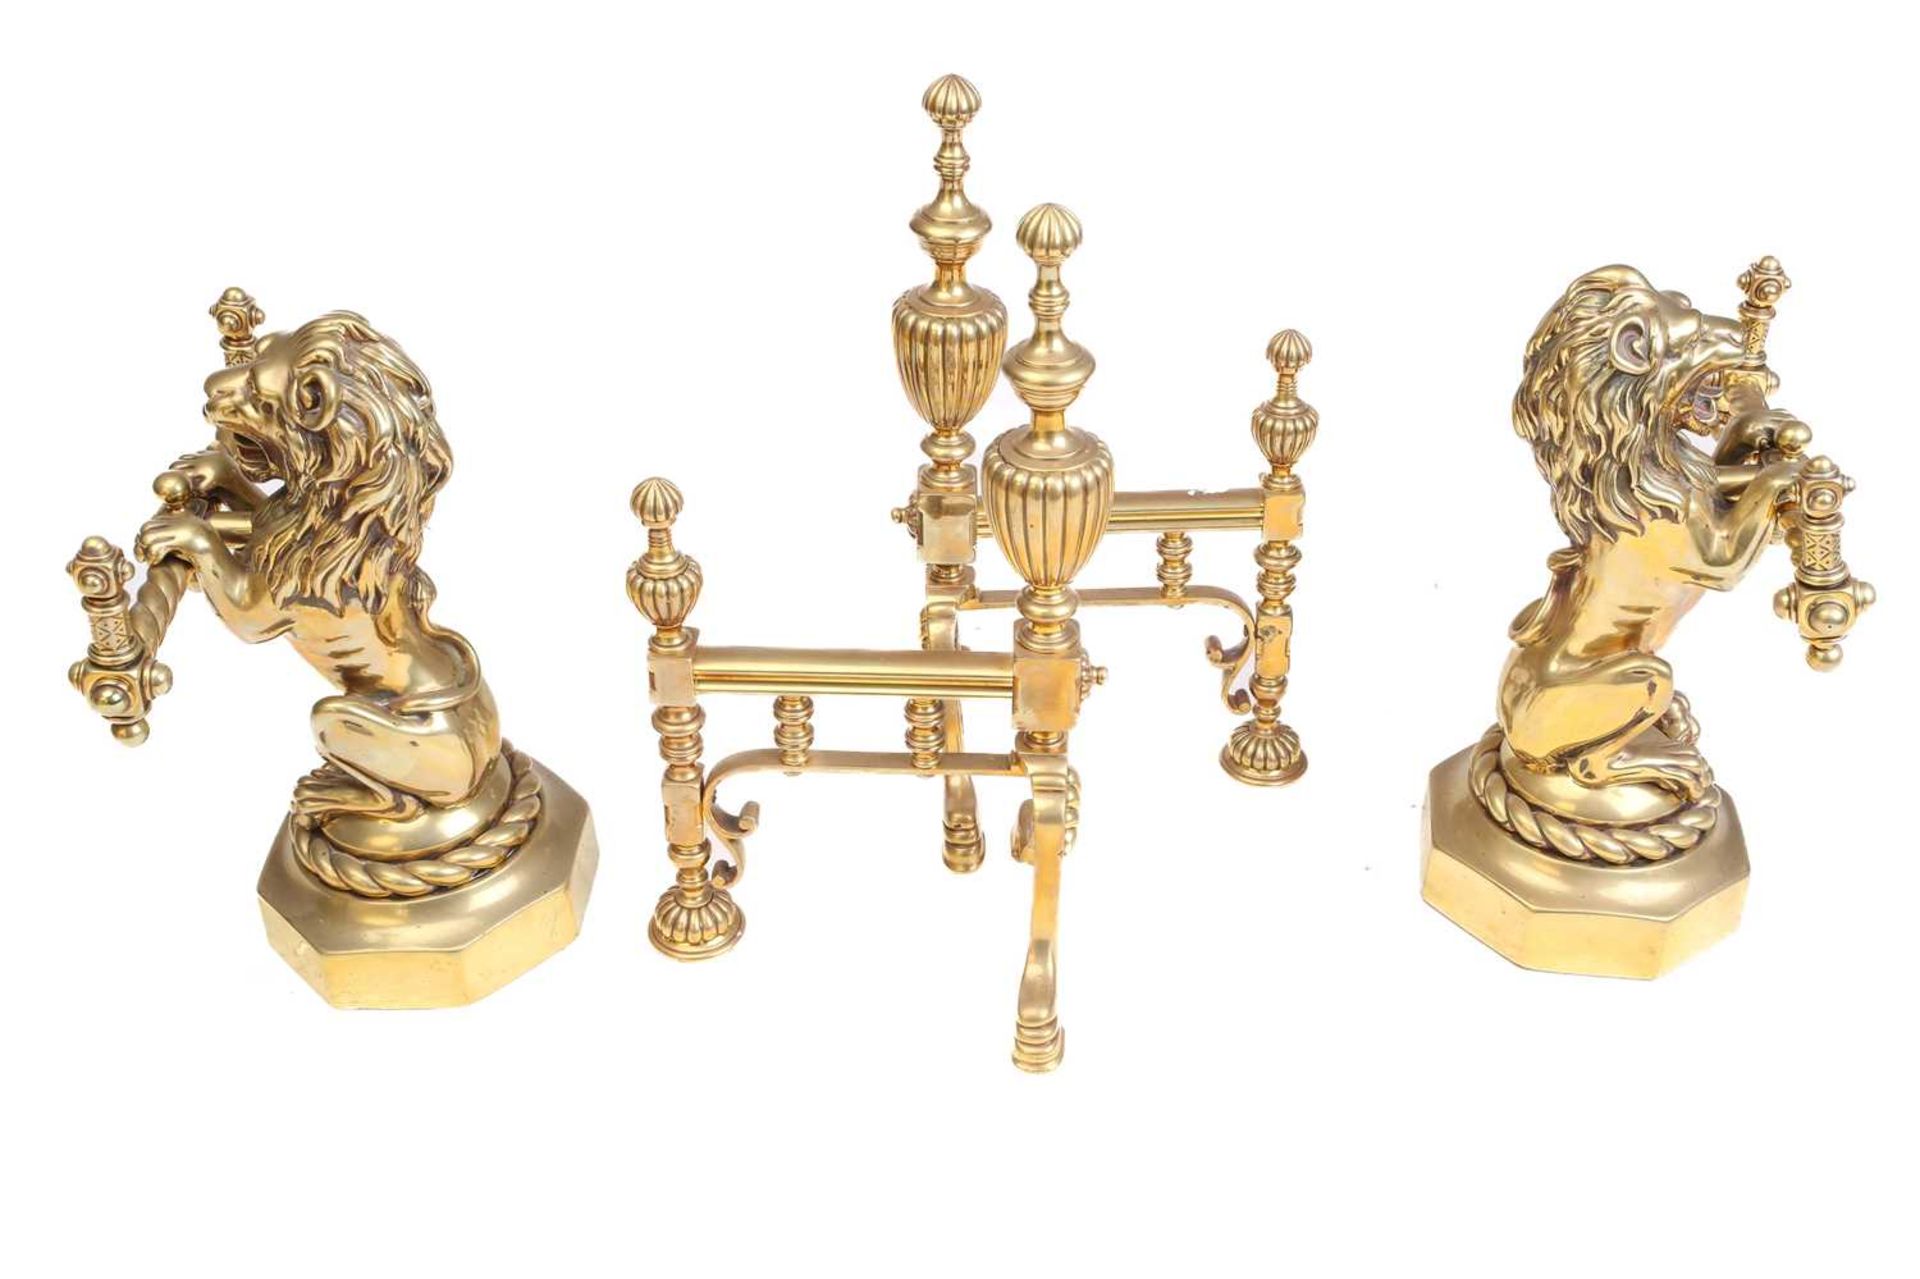 A pair of Victorian cast and gilt brass heraldic sejant erect lion firedogs, each holding a - Image 4 of 7